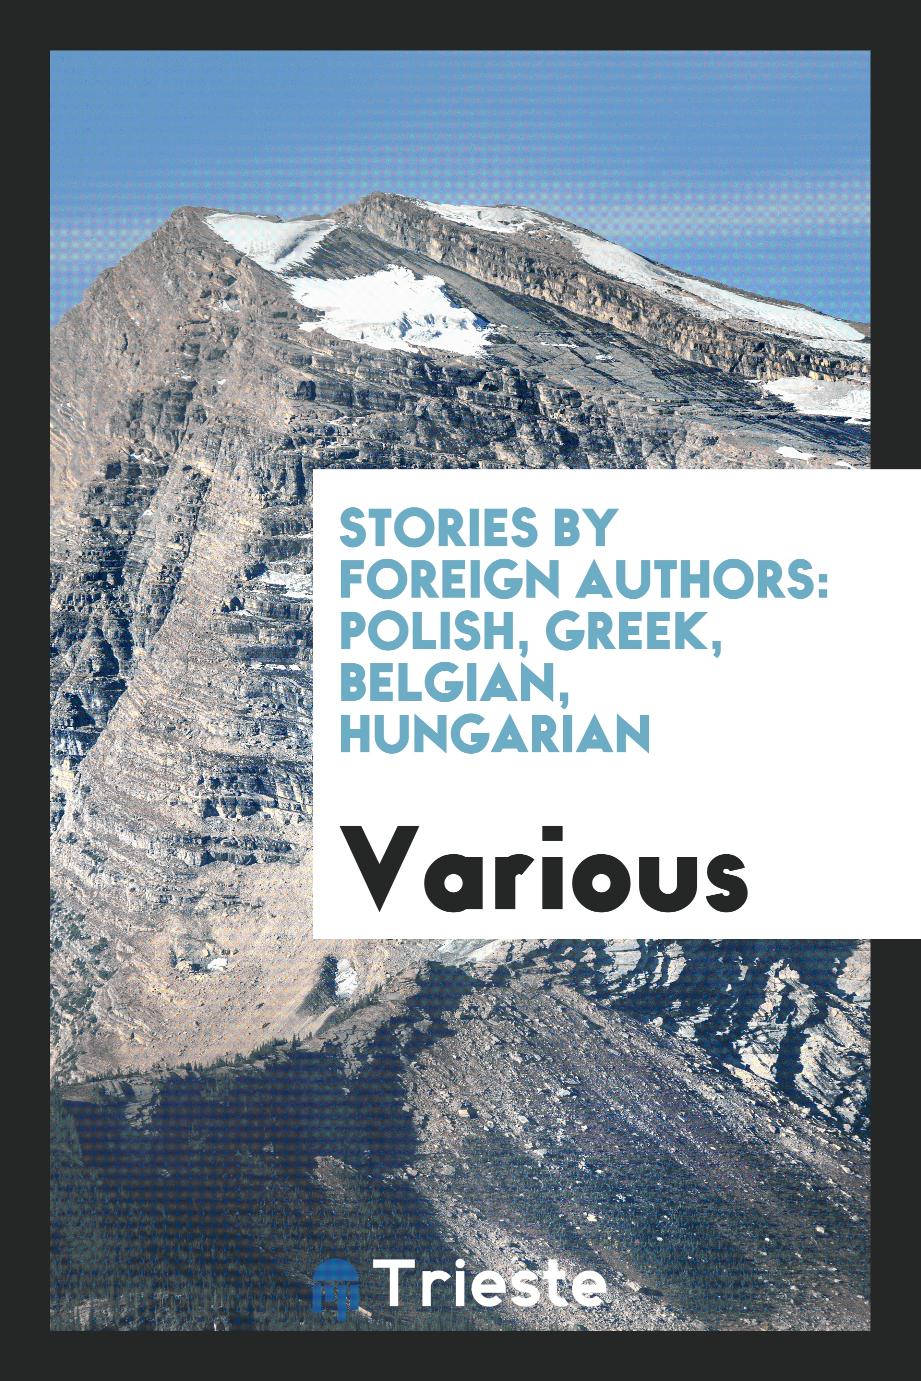 Stories by foreign authors: Polish, Greek, Belgian, Hungarian